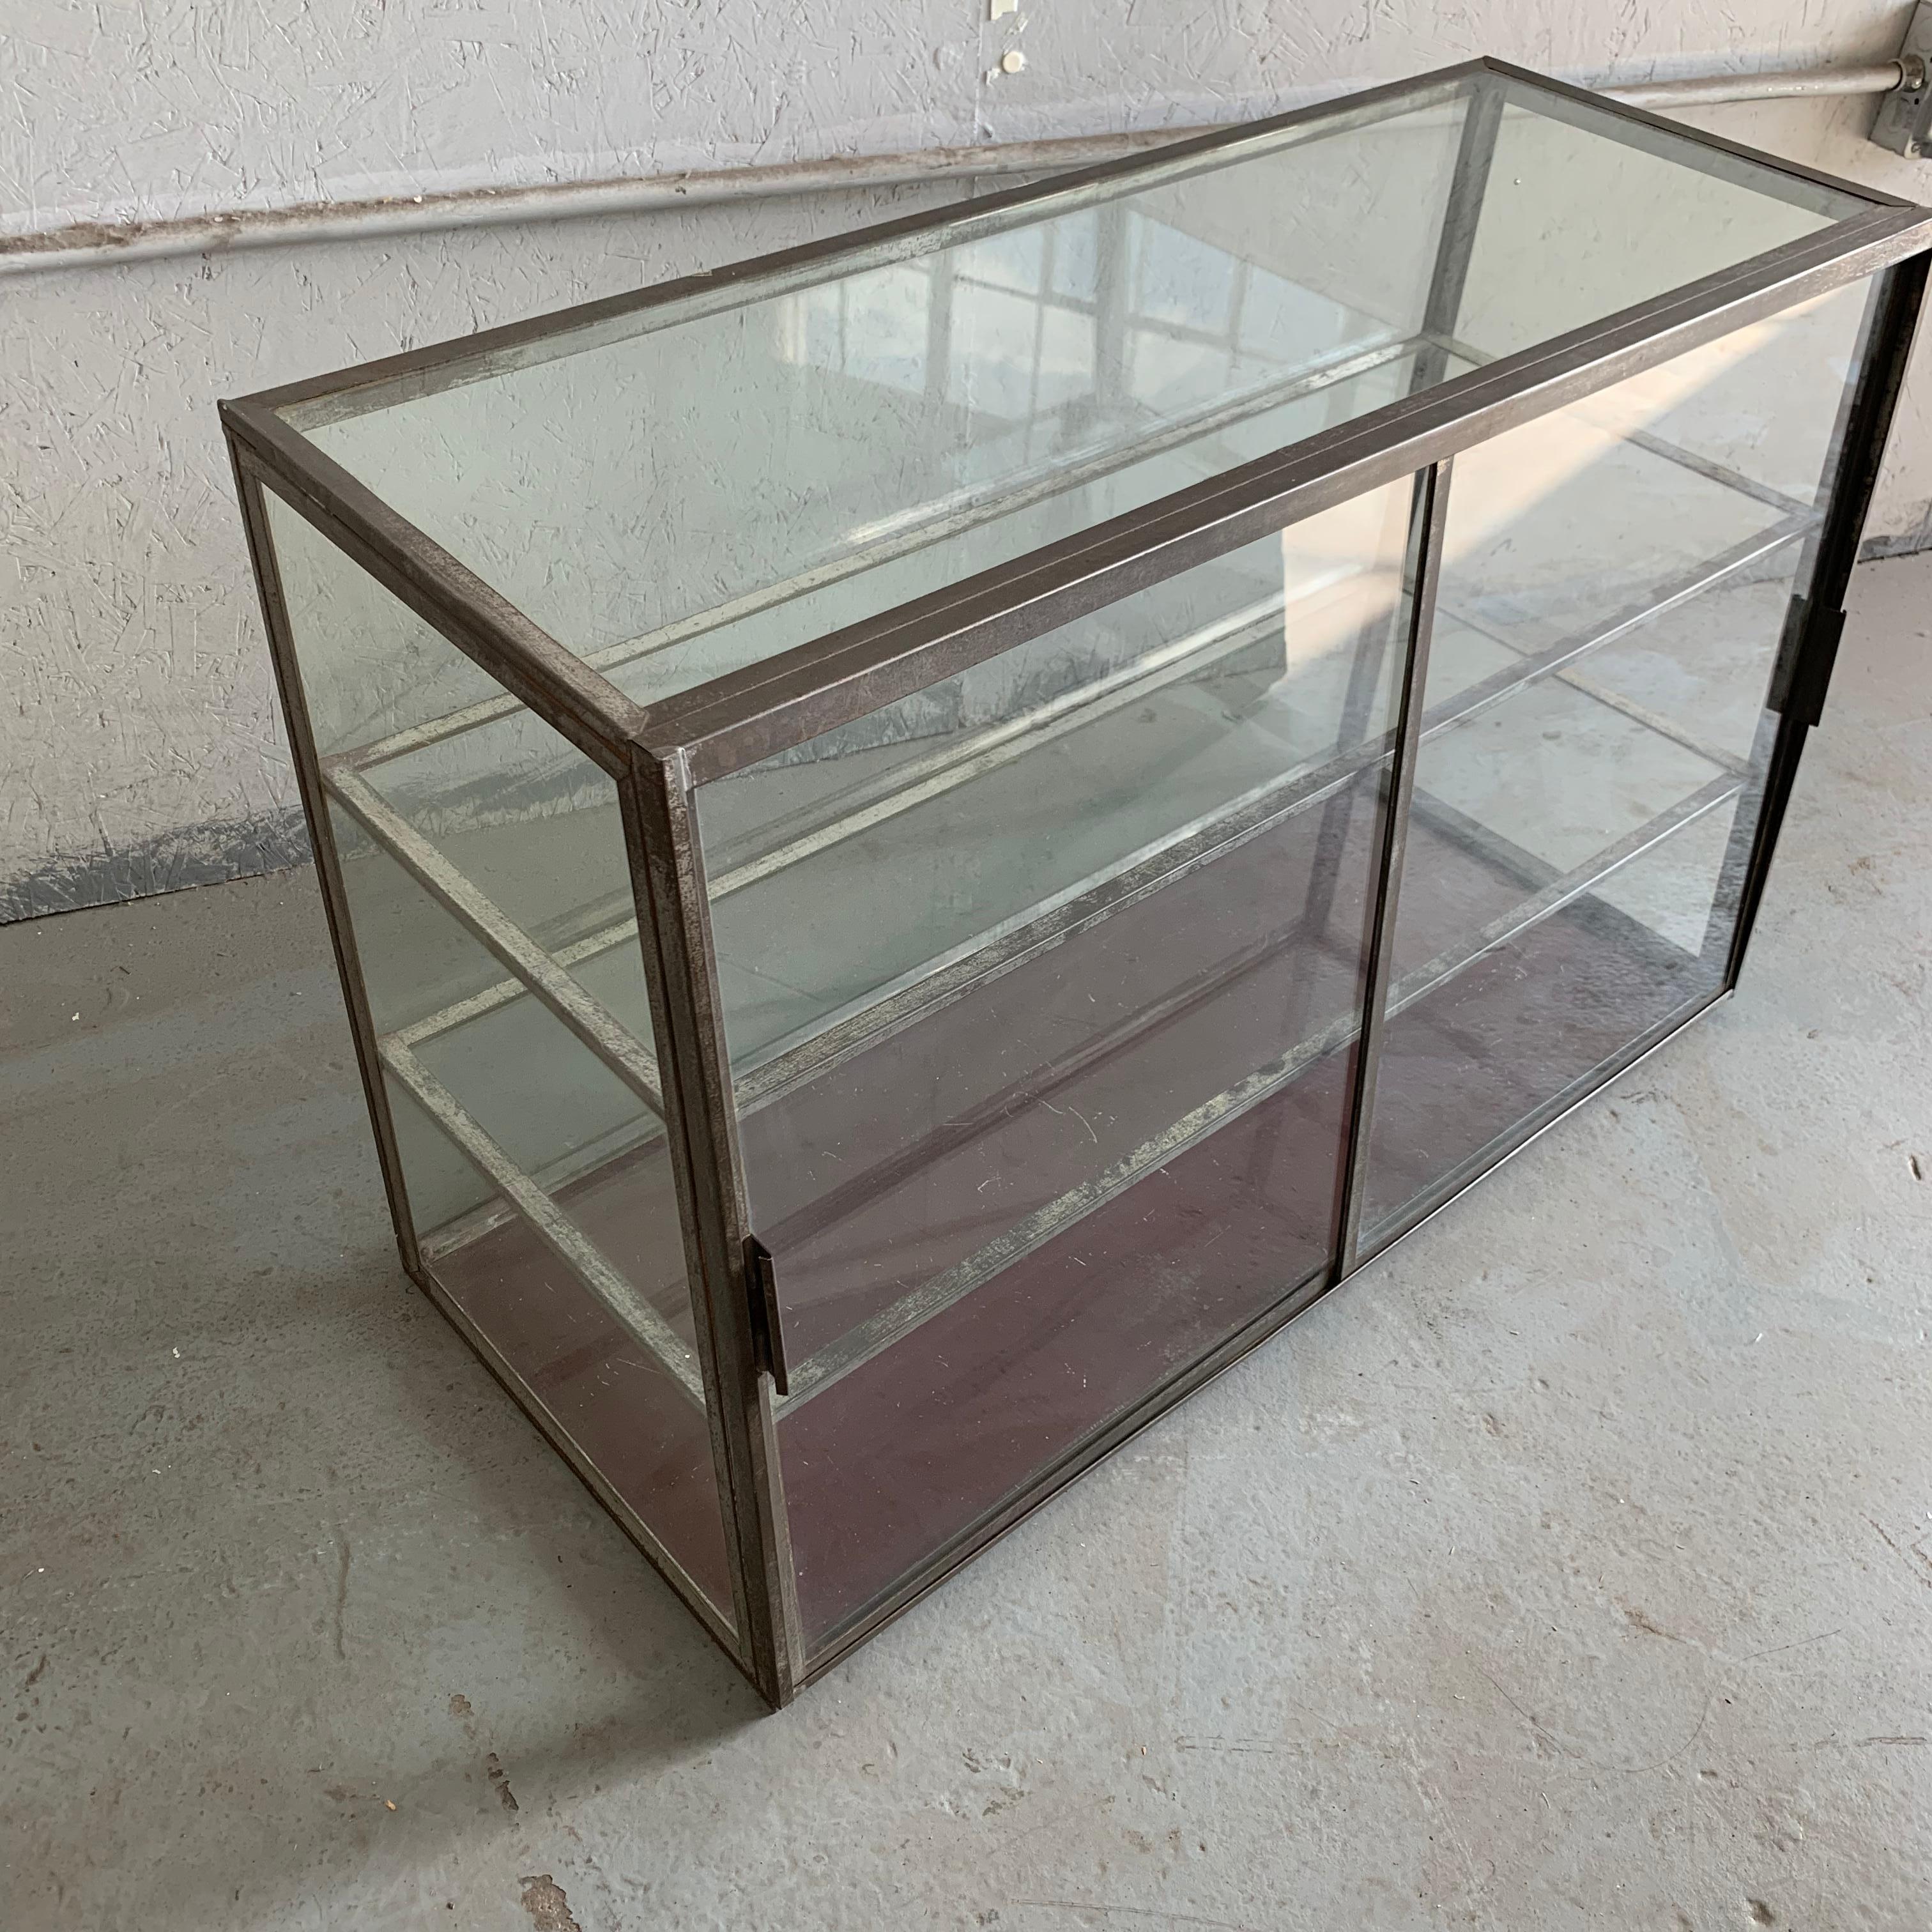 Early American Vintage Two-Tier Sheet Metal Table Top Shop Display Case 6